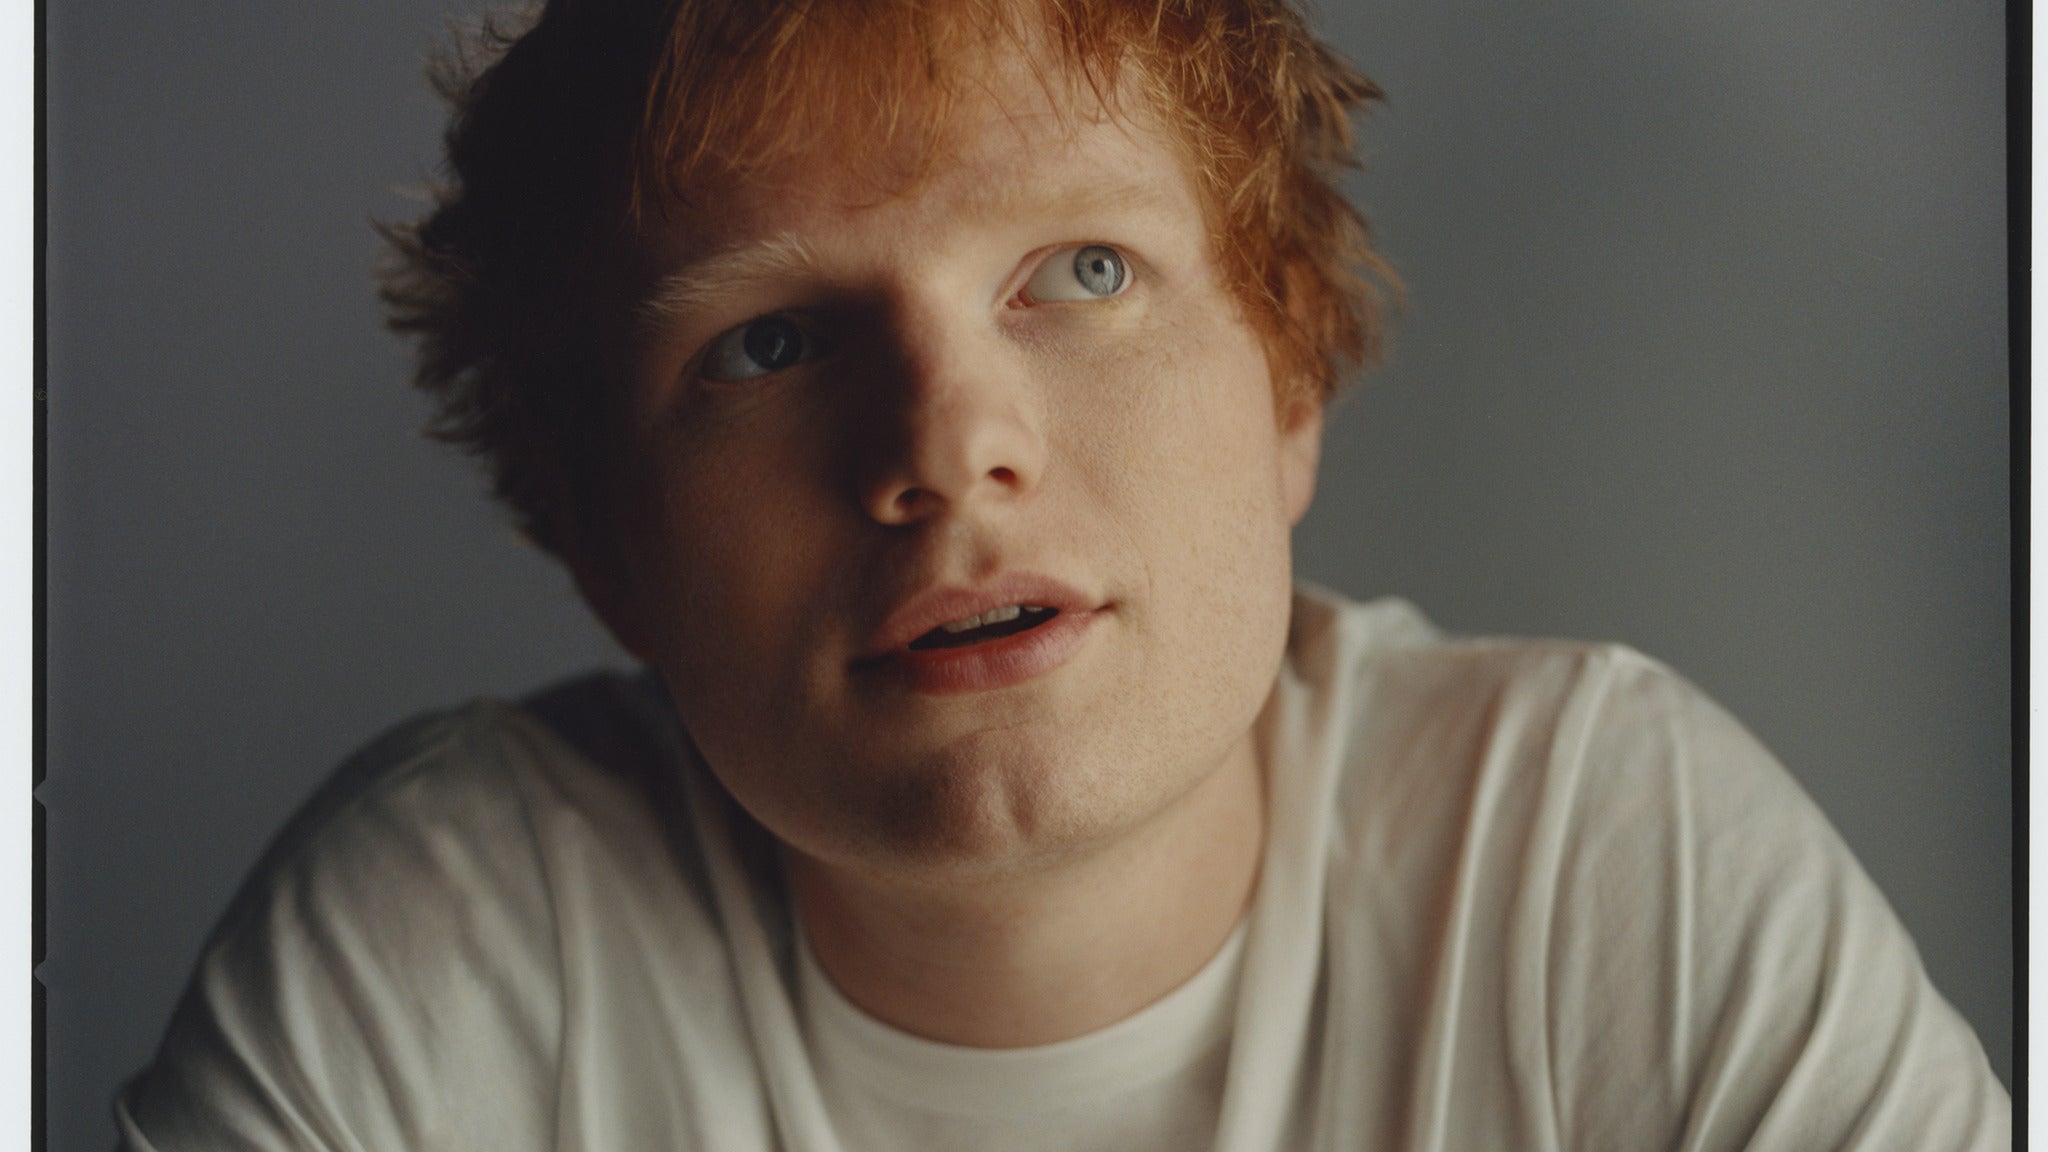 Image used with permission from Ticketmaster | Ed Sheeran tickets